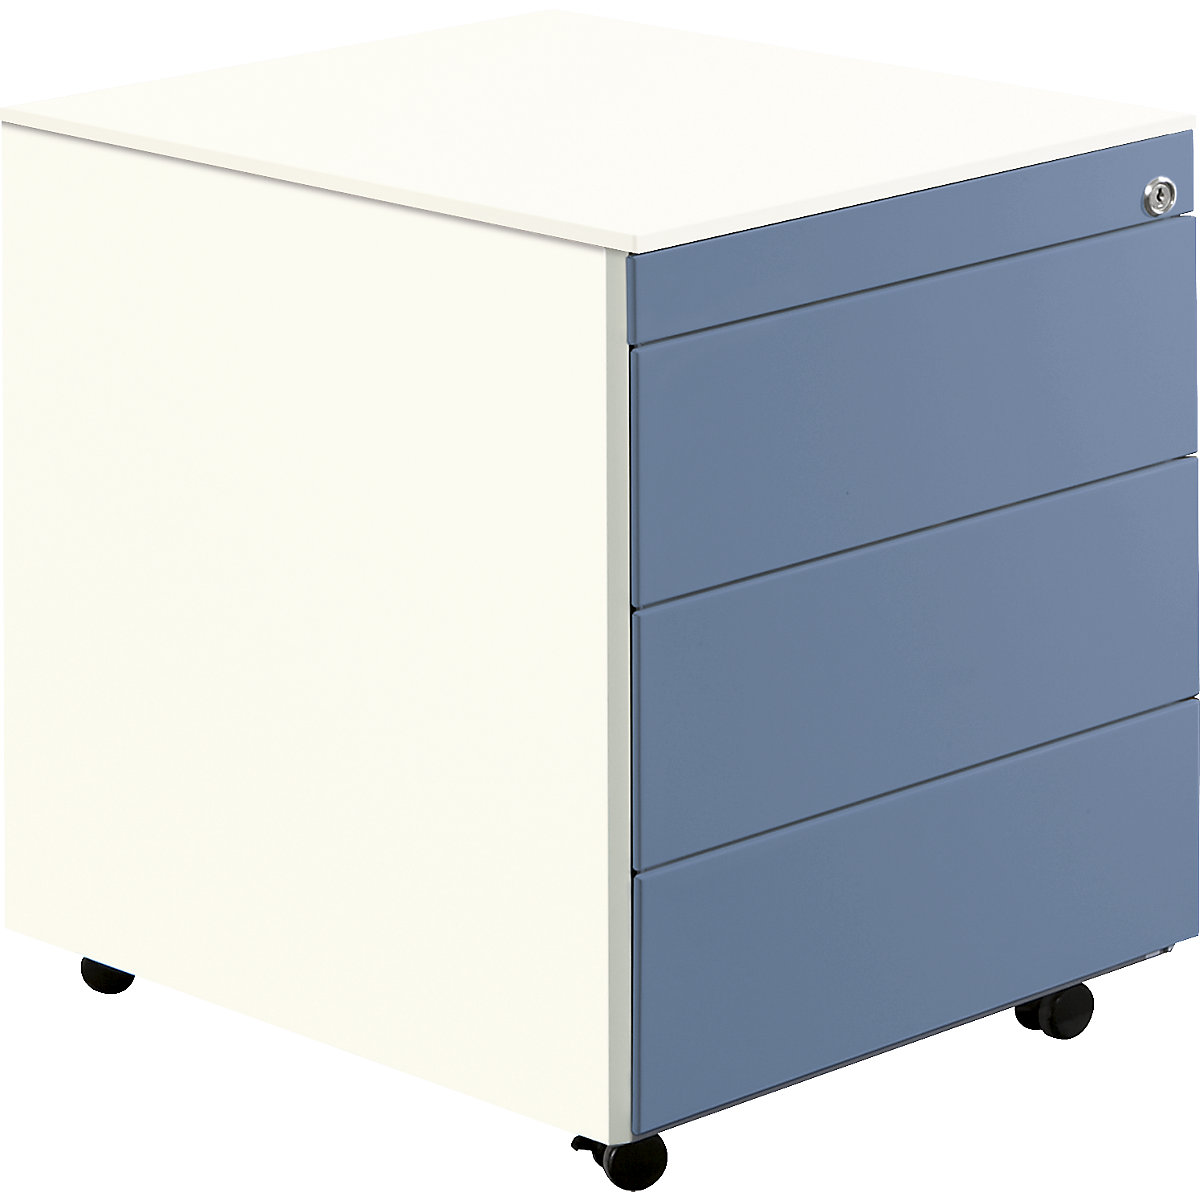 Drawer pedestal with castors – mauser, HxD 570 x 600 mm, steel top, 3 drawers, pure white / pigeon blue / pure white-13